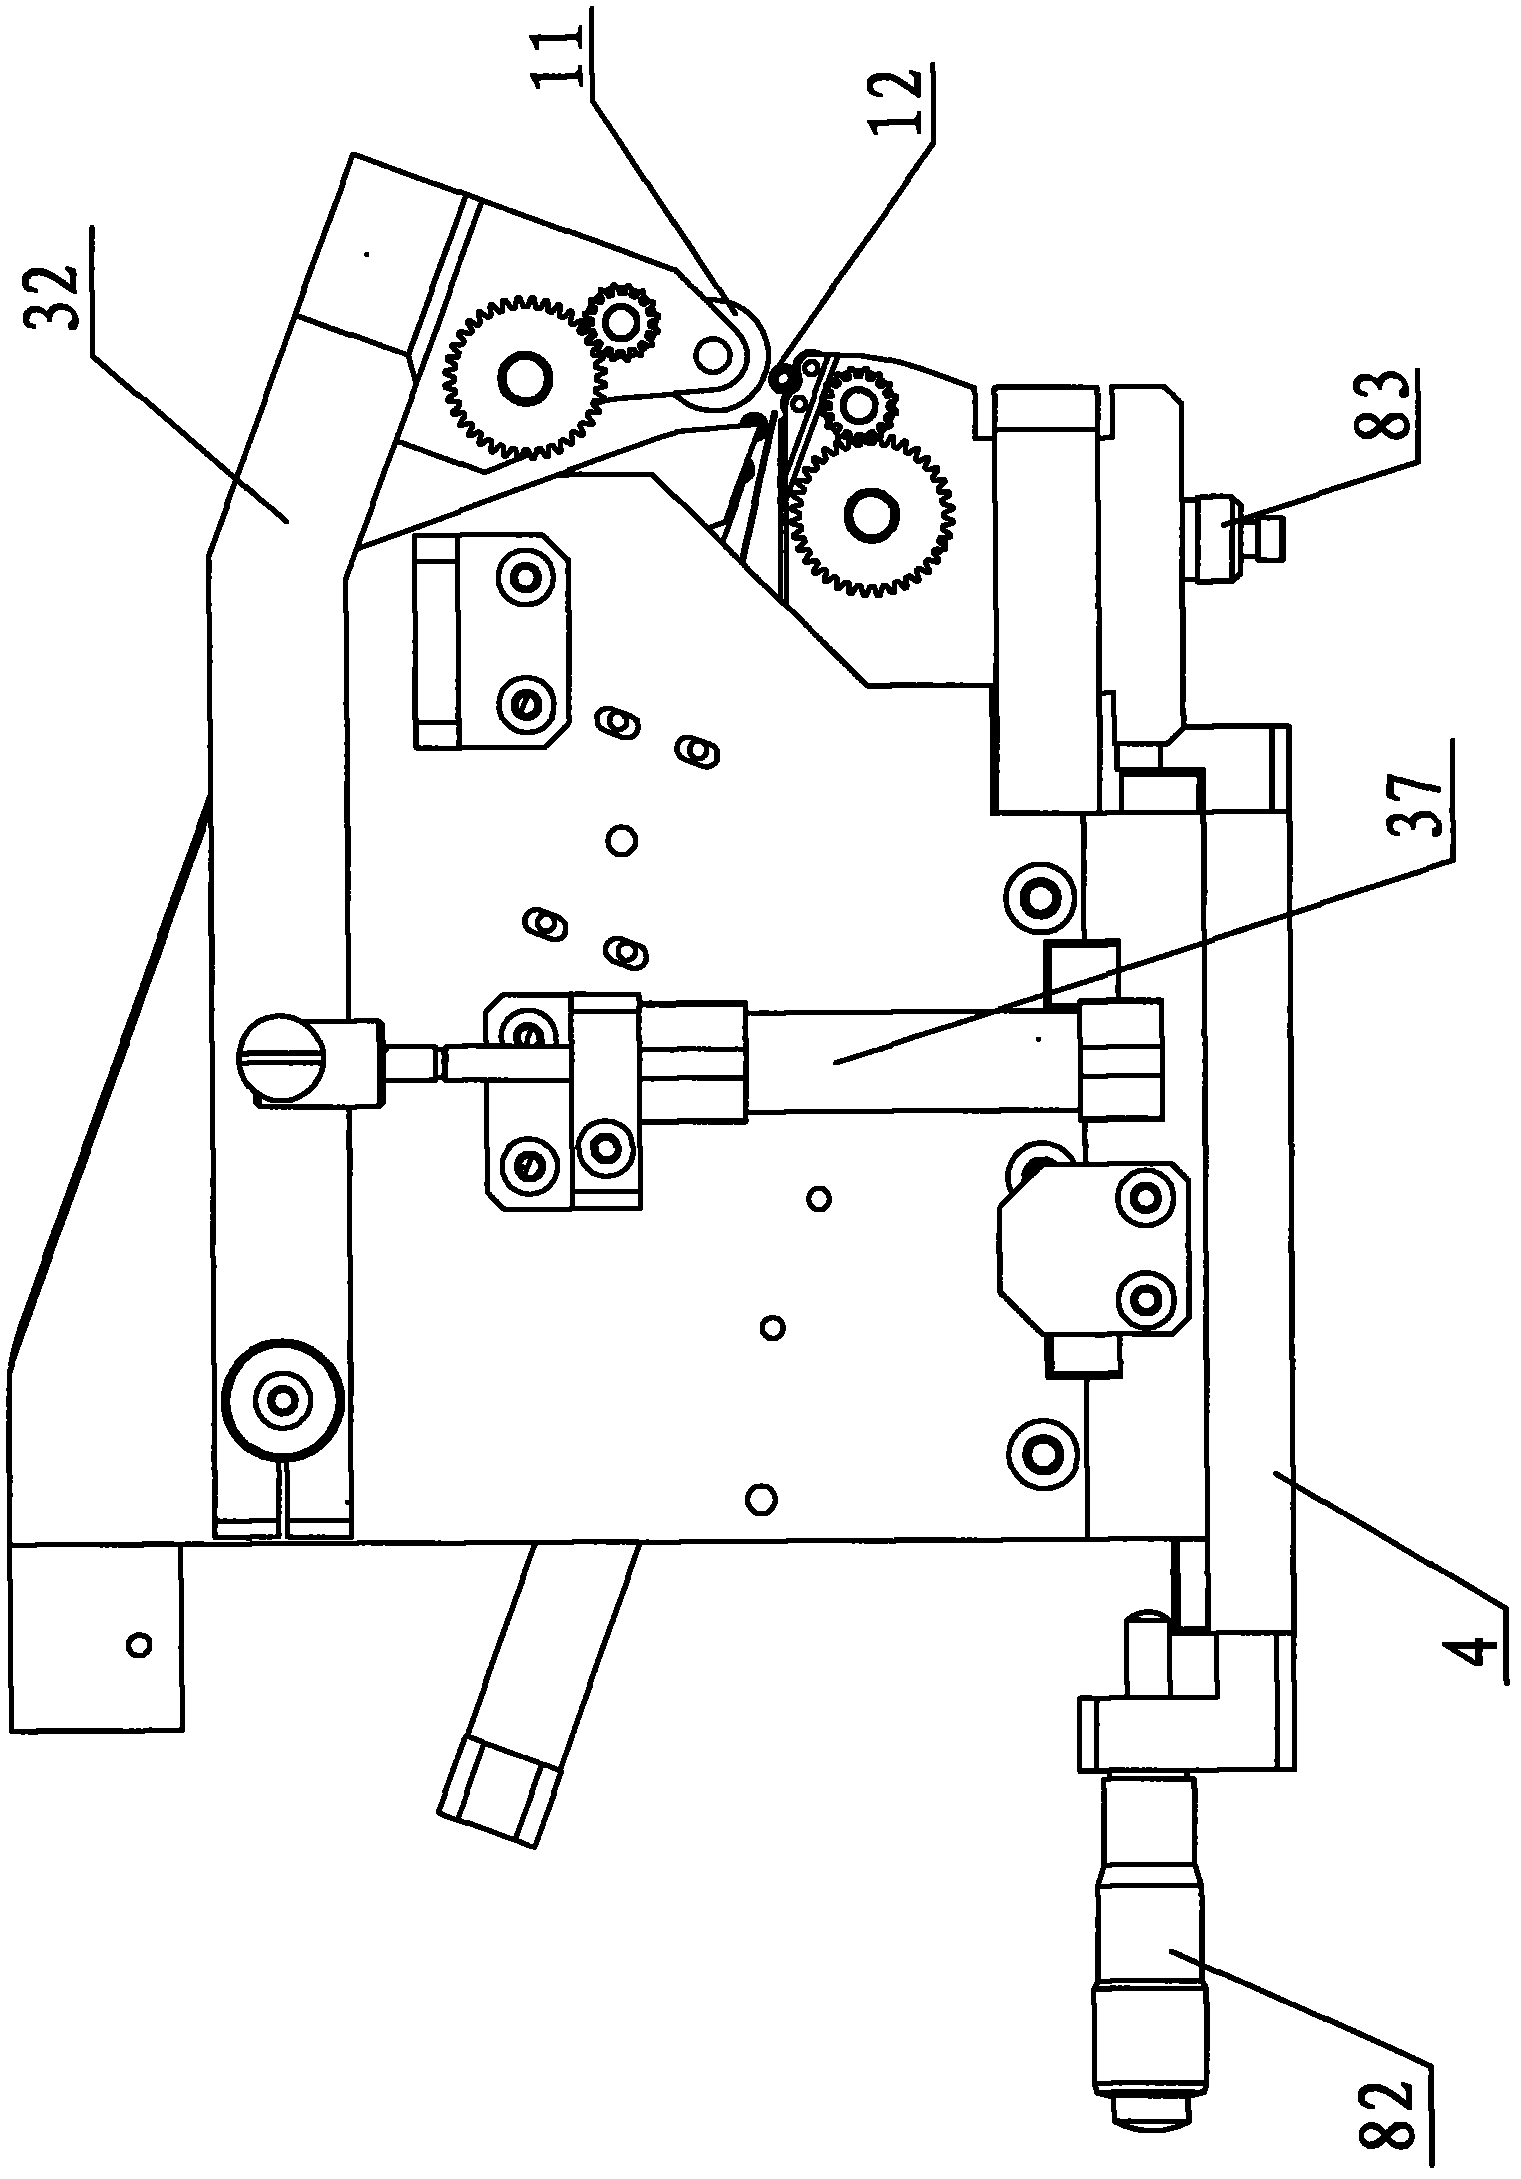 Clamping seat of full-automatic winding machine